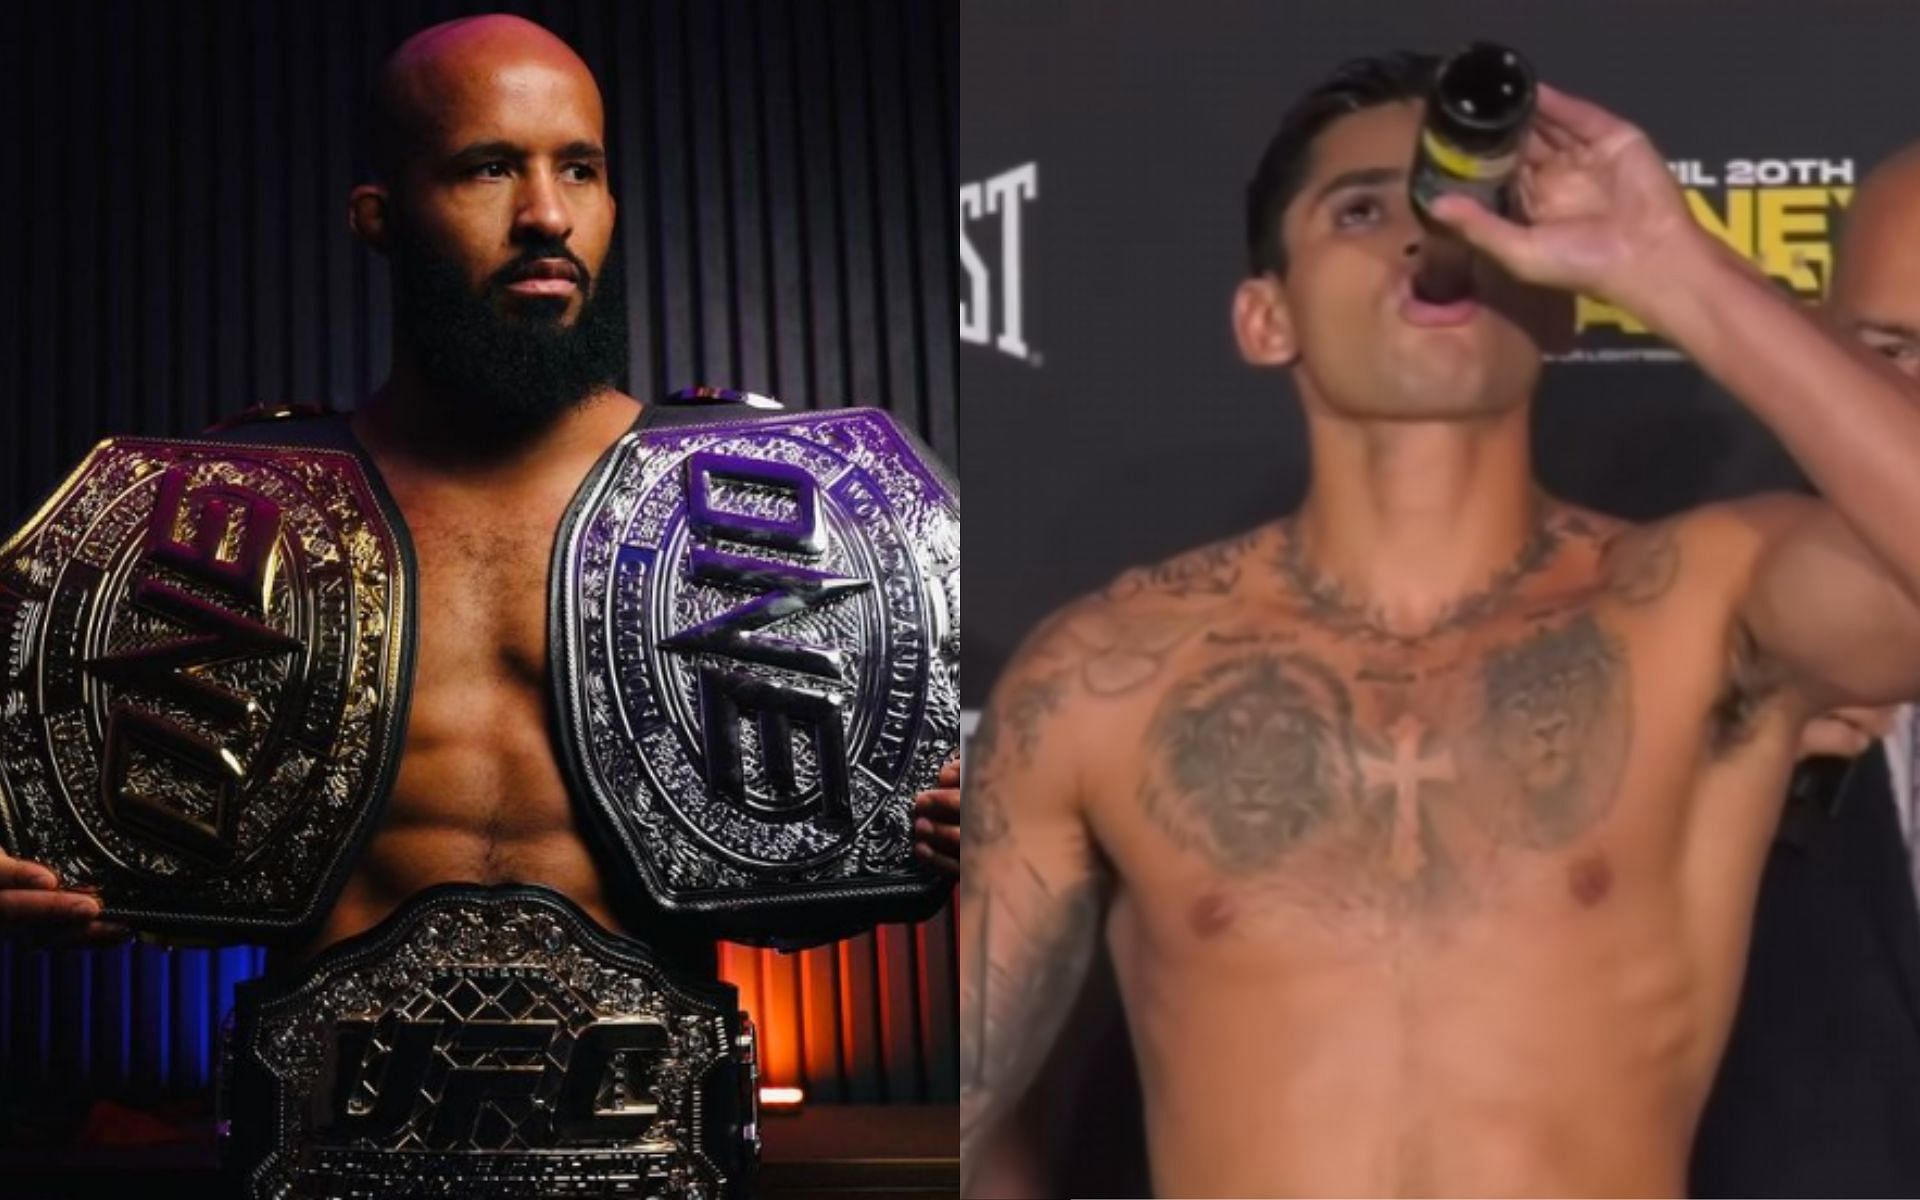 Demetrious Johnson (left) reacts to Ryan Garcia (right) appearing to chug a beer at weigh-ins [Images courtesy of @mighty &amp; @mmafighting on Instagram]